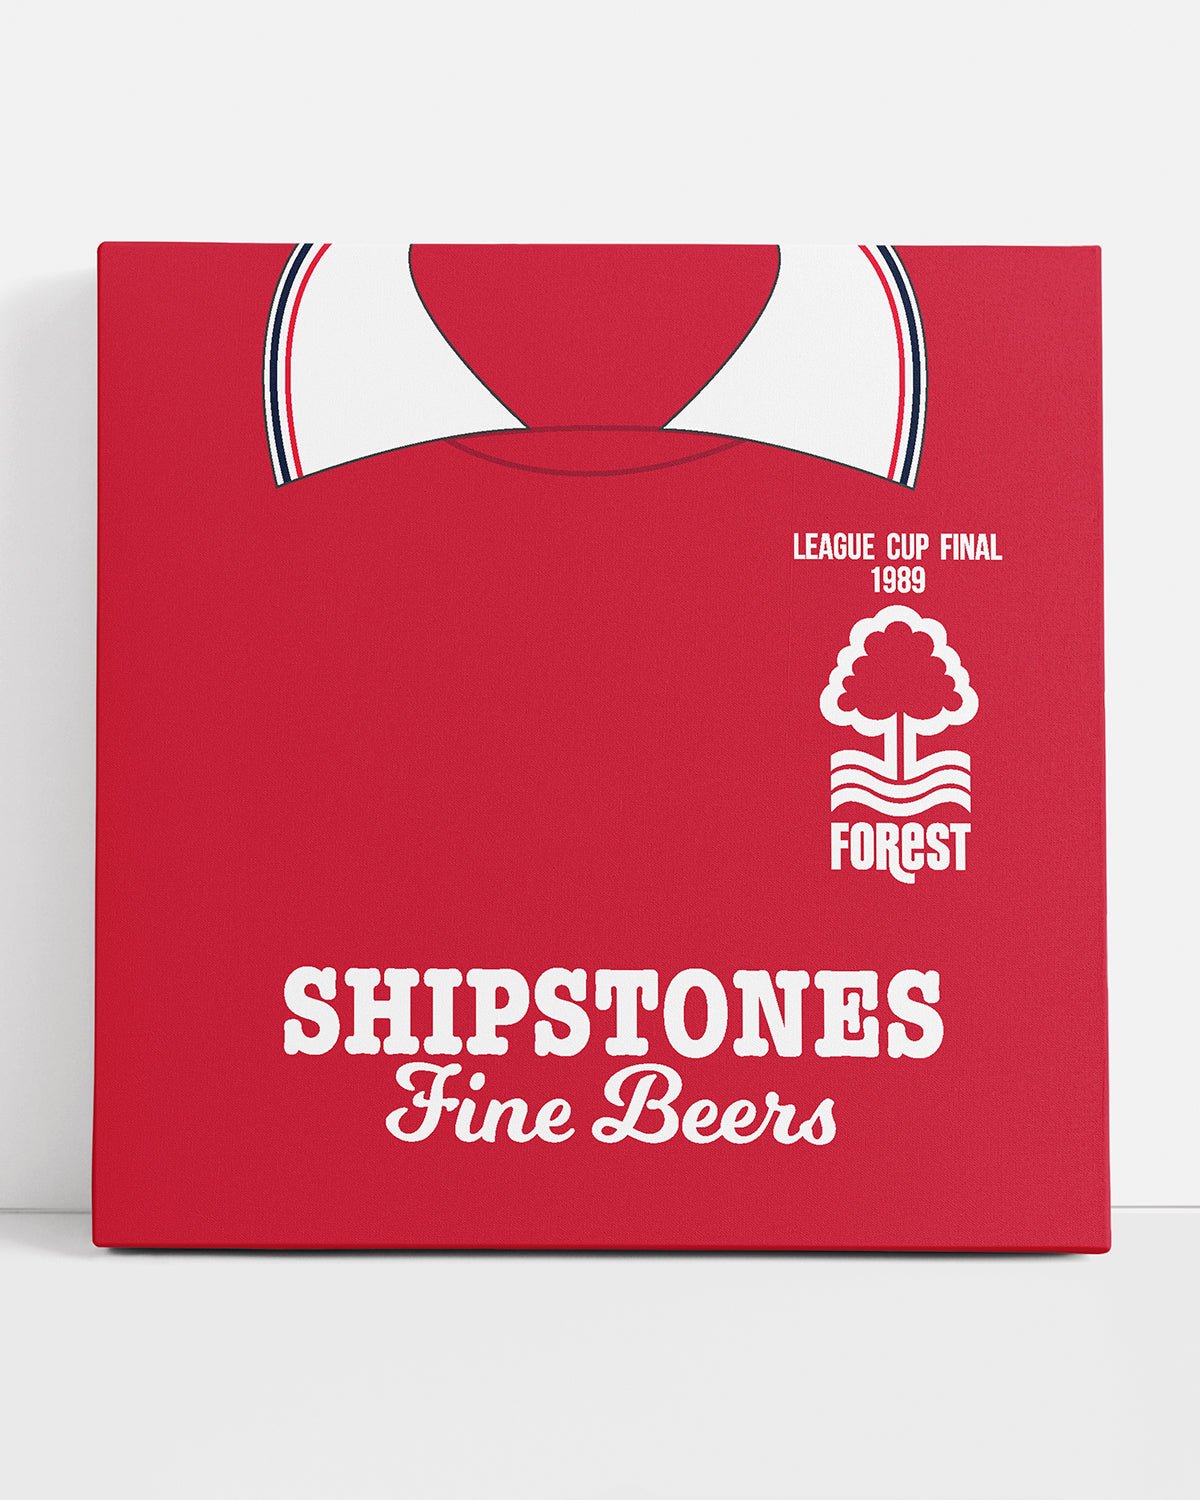 NFFC 1989 Retro Canvas - Nottingham Forest FC